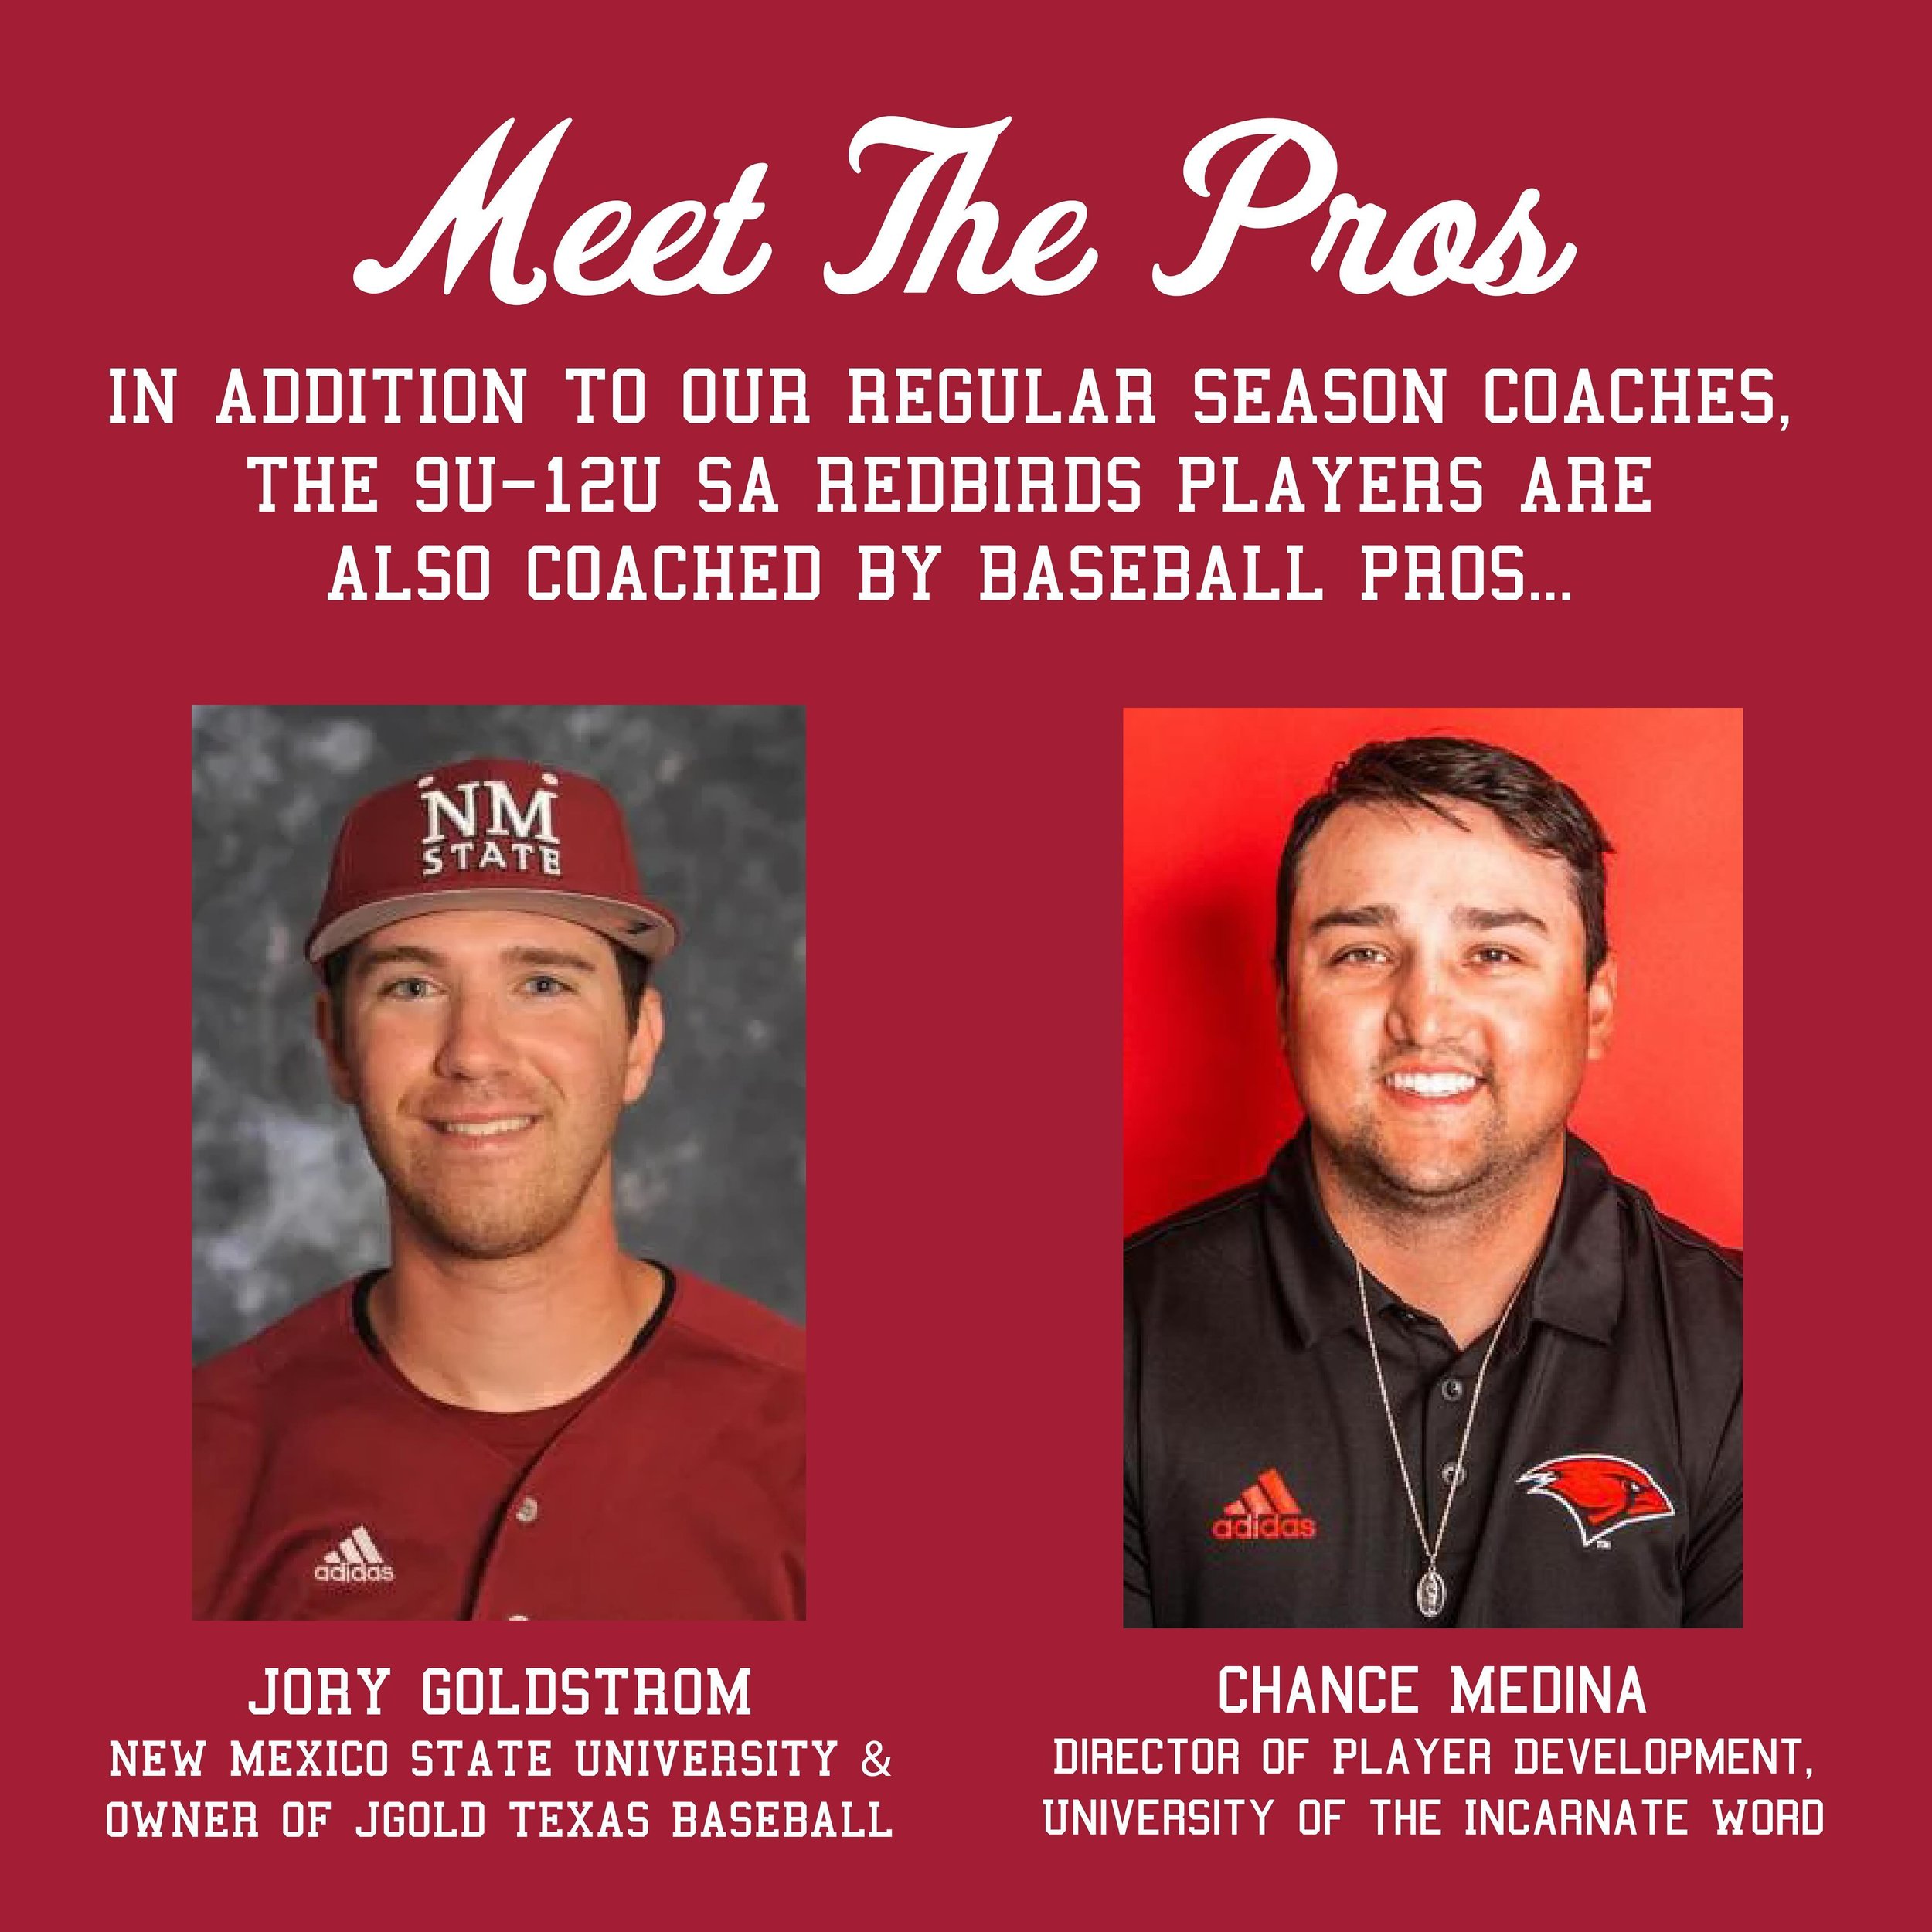 MEET THE PROS: In addition to our regular season coaches, the 9u-12u SA Redbirds players are also coached by baseball pros Jory Goldstrom and Chance Medina. #saredbirds